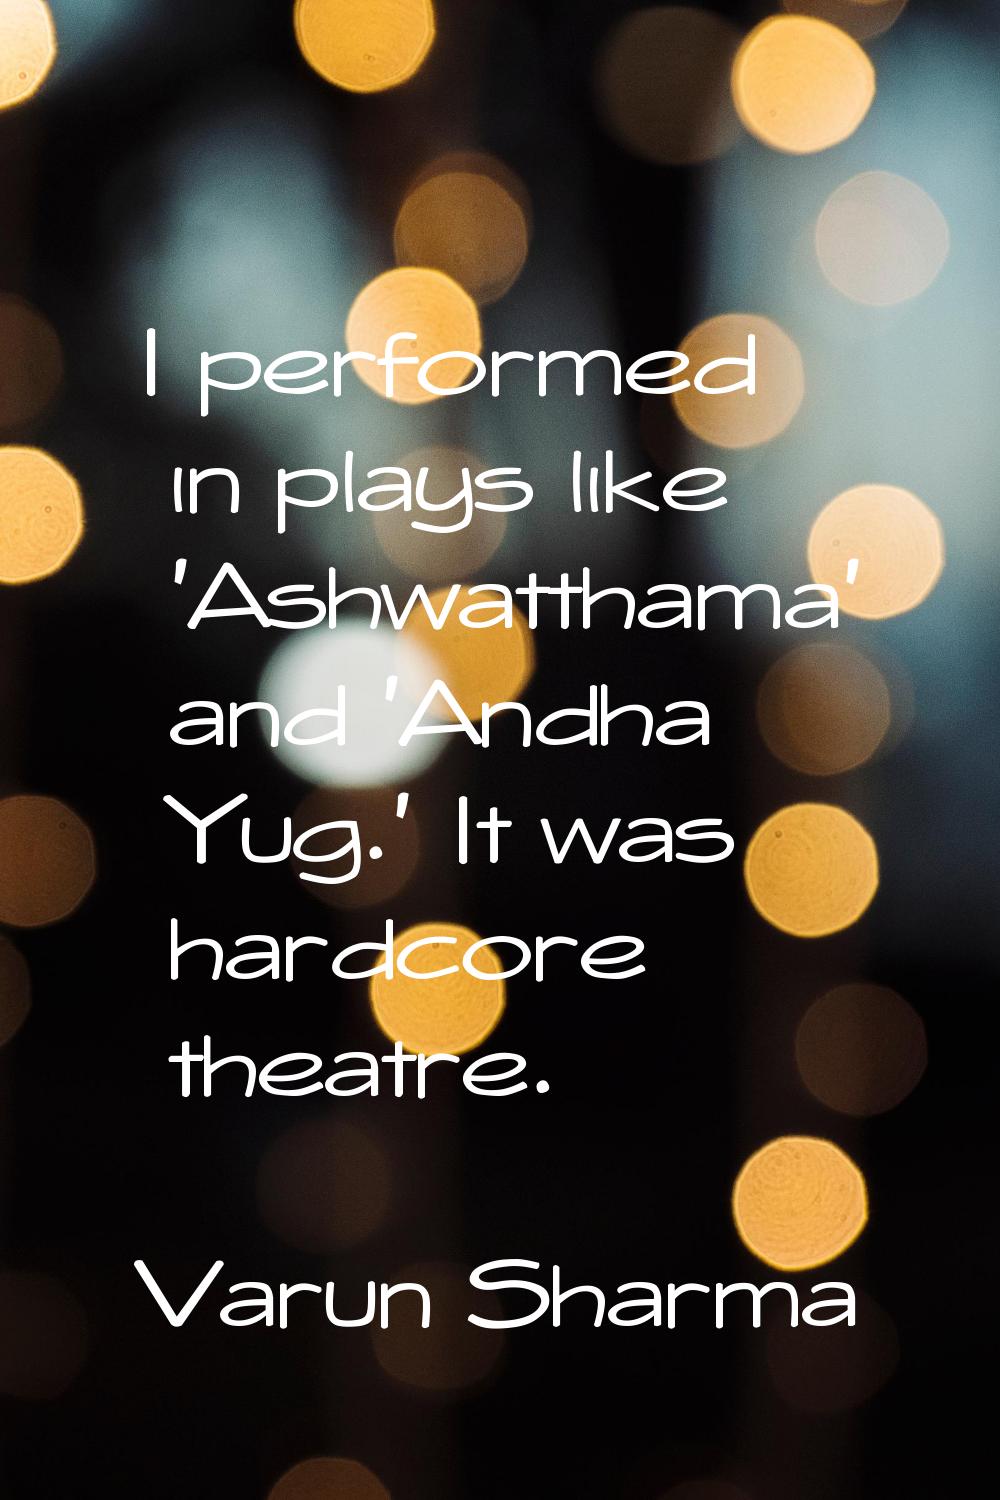 I performed in plays like 'Ashwatthama' and 'Andha Yug.' It was hardcore theatre.